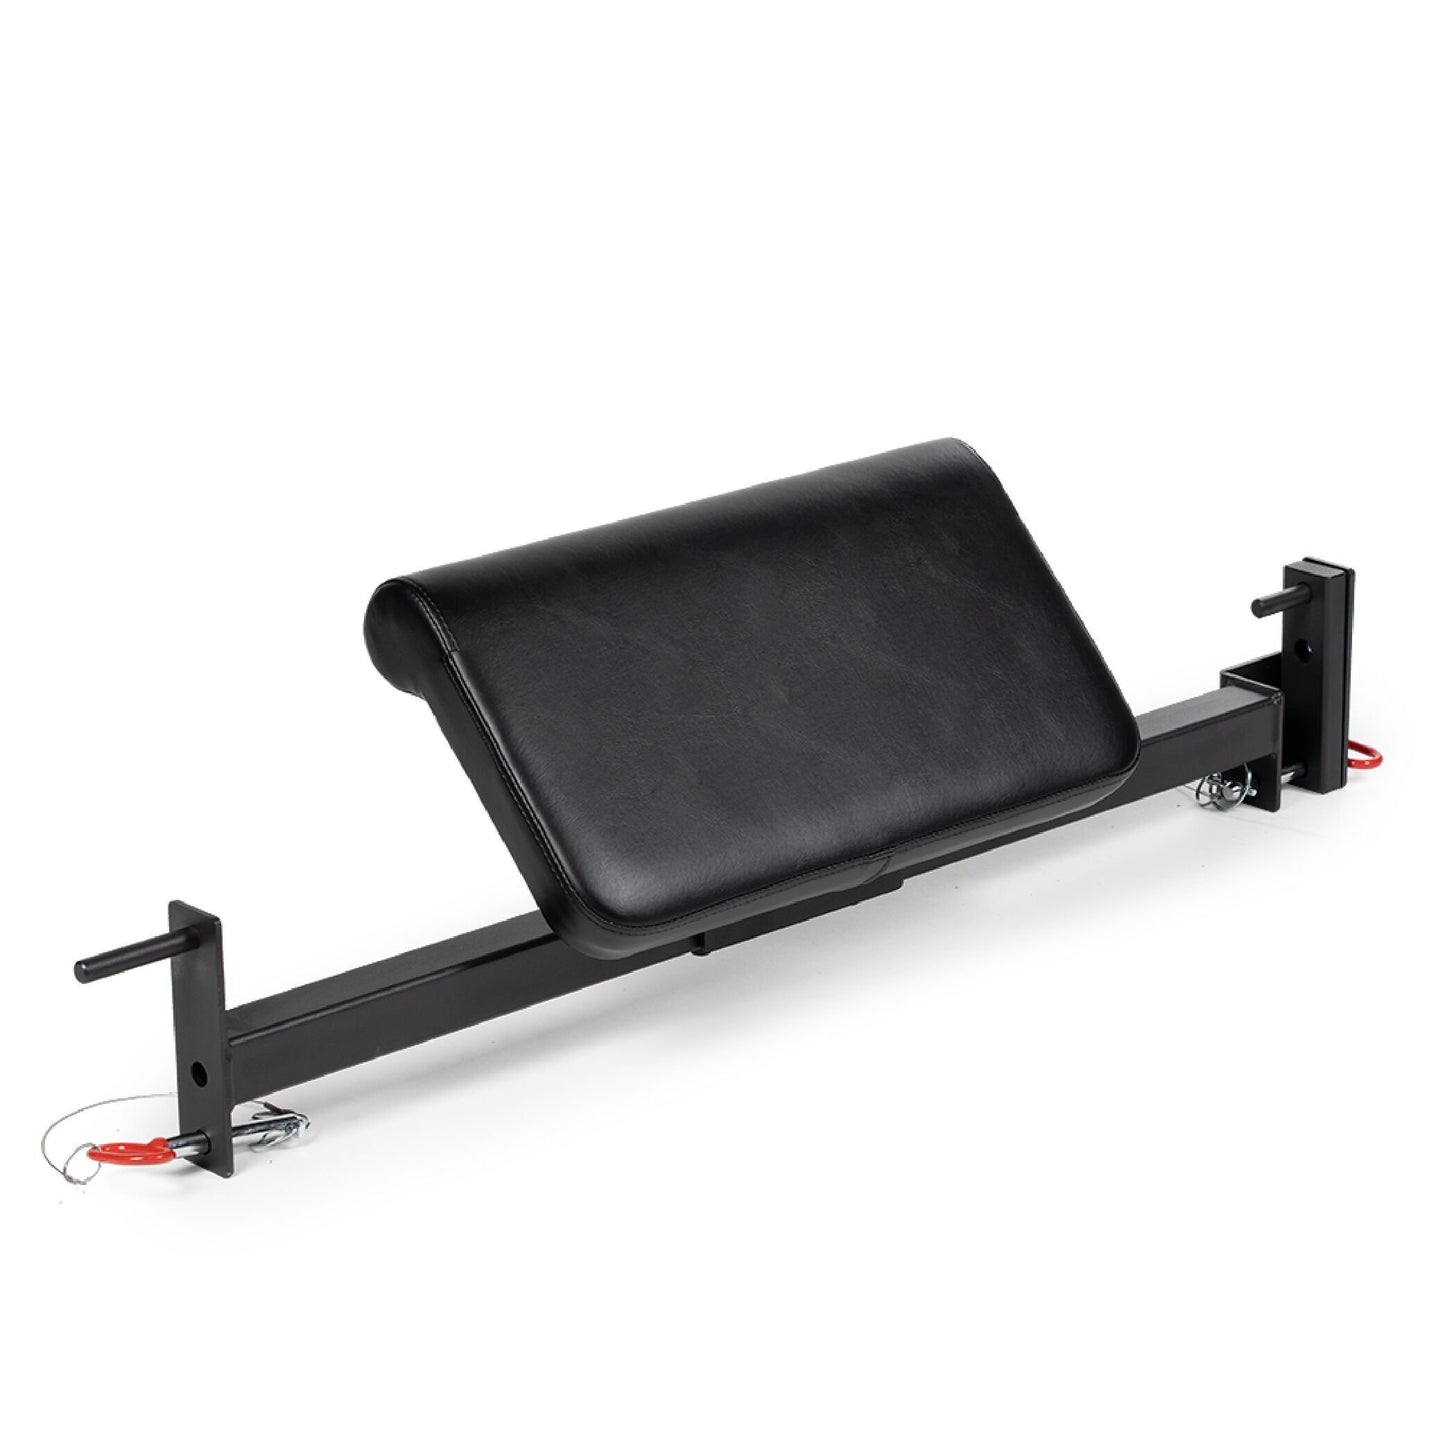 Scratch and Dent - Rack Mounted Preacher Curl - X-2, X-3, and T-3 Series Compatible - FINAL SALE - view 1